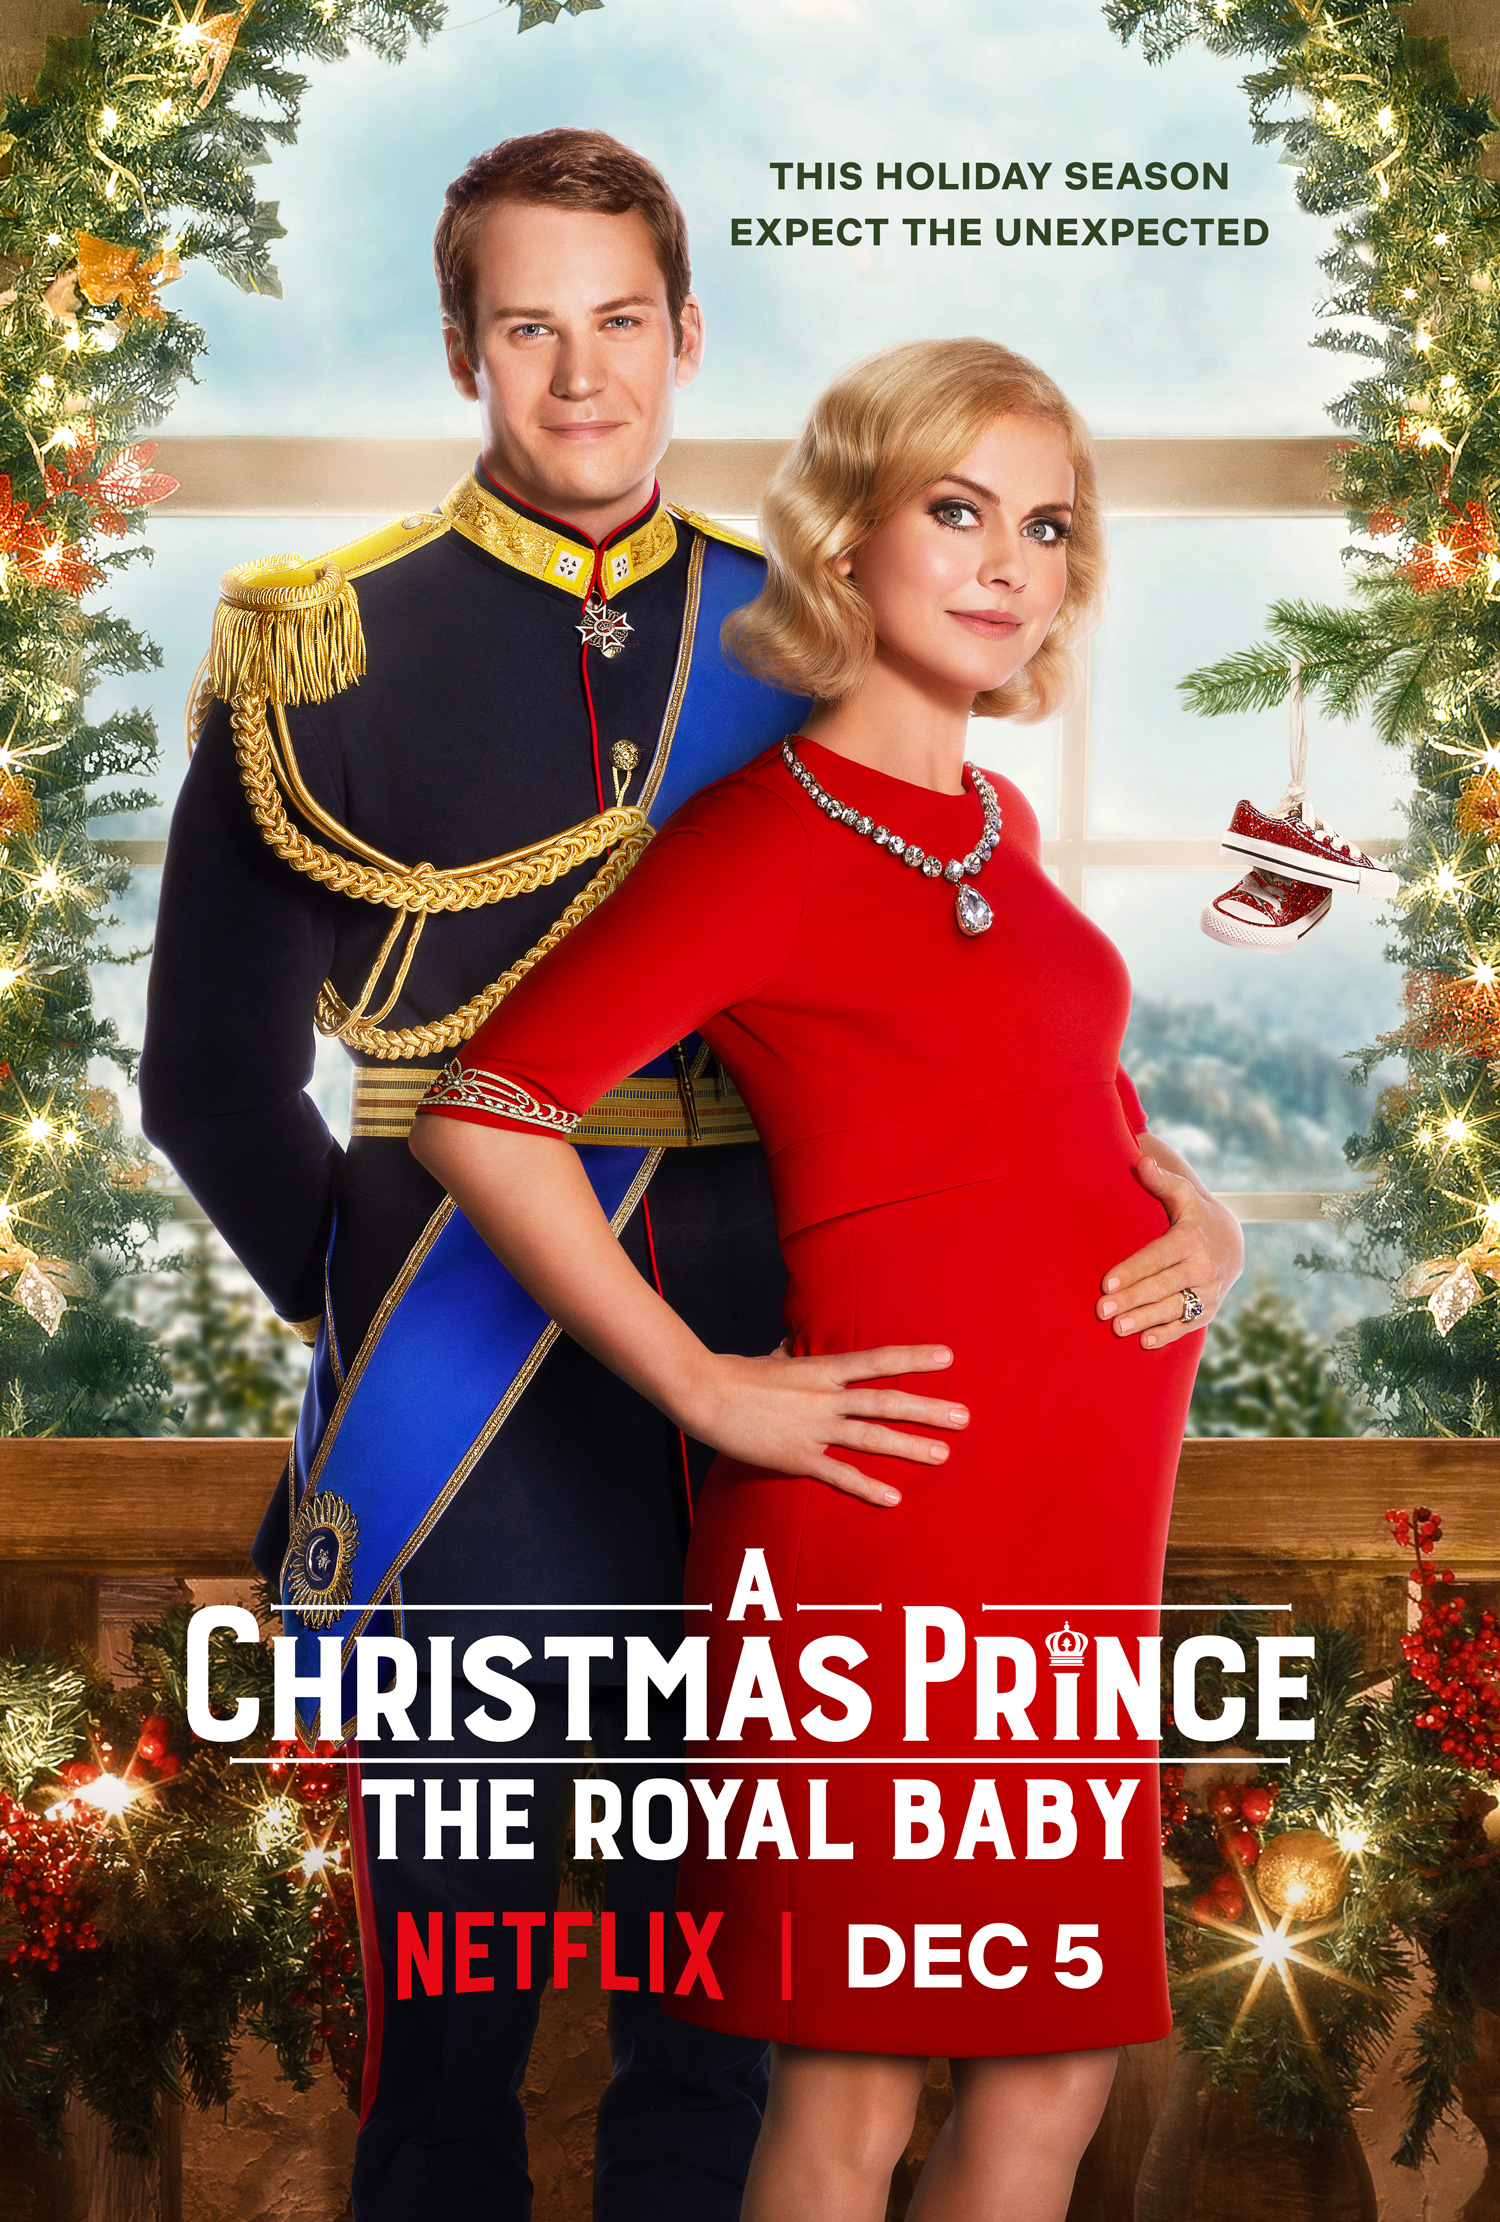 Netflix's A Christmas Prince The Royal Baby Official Trailer